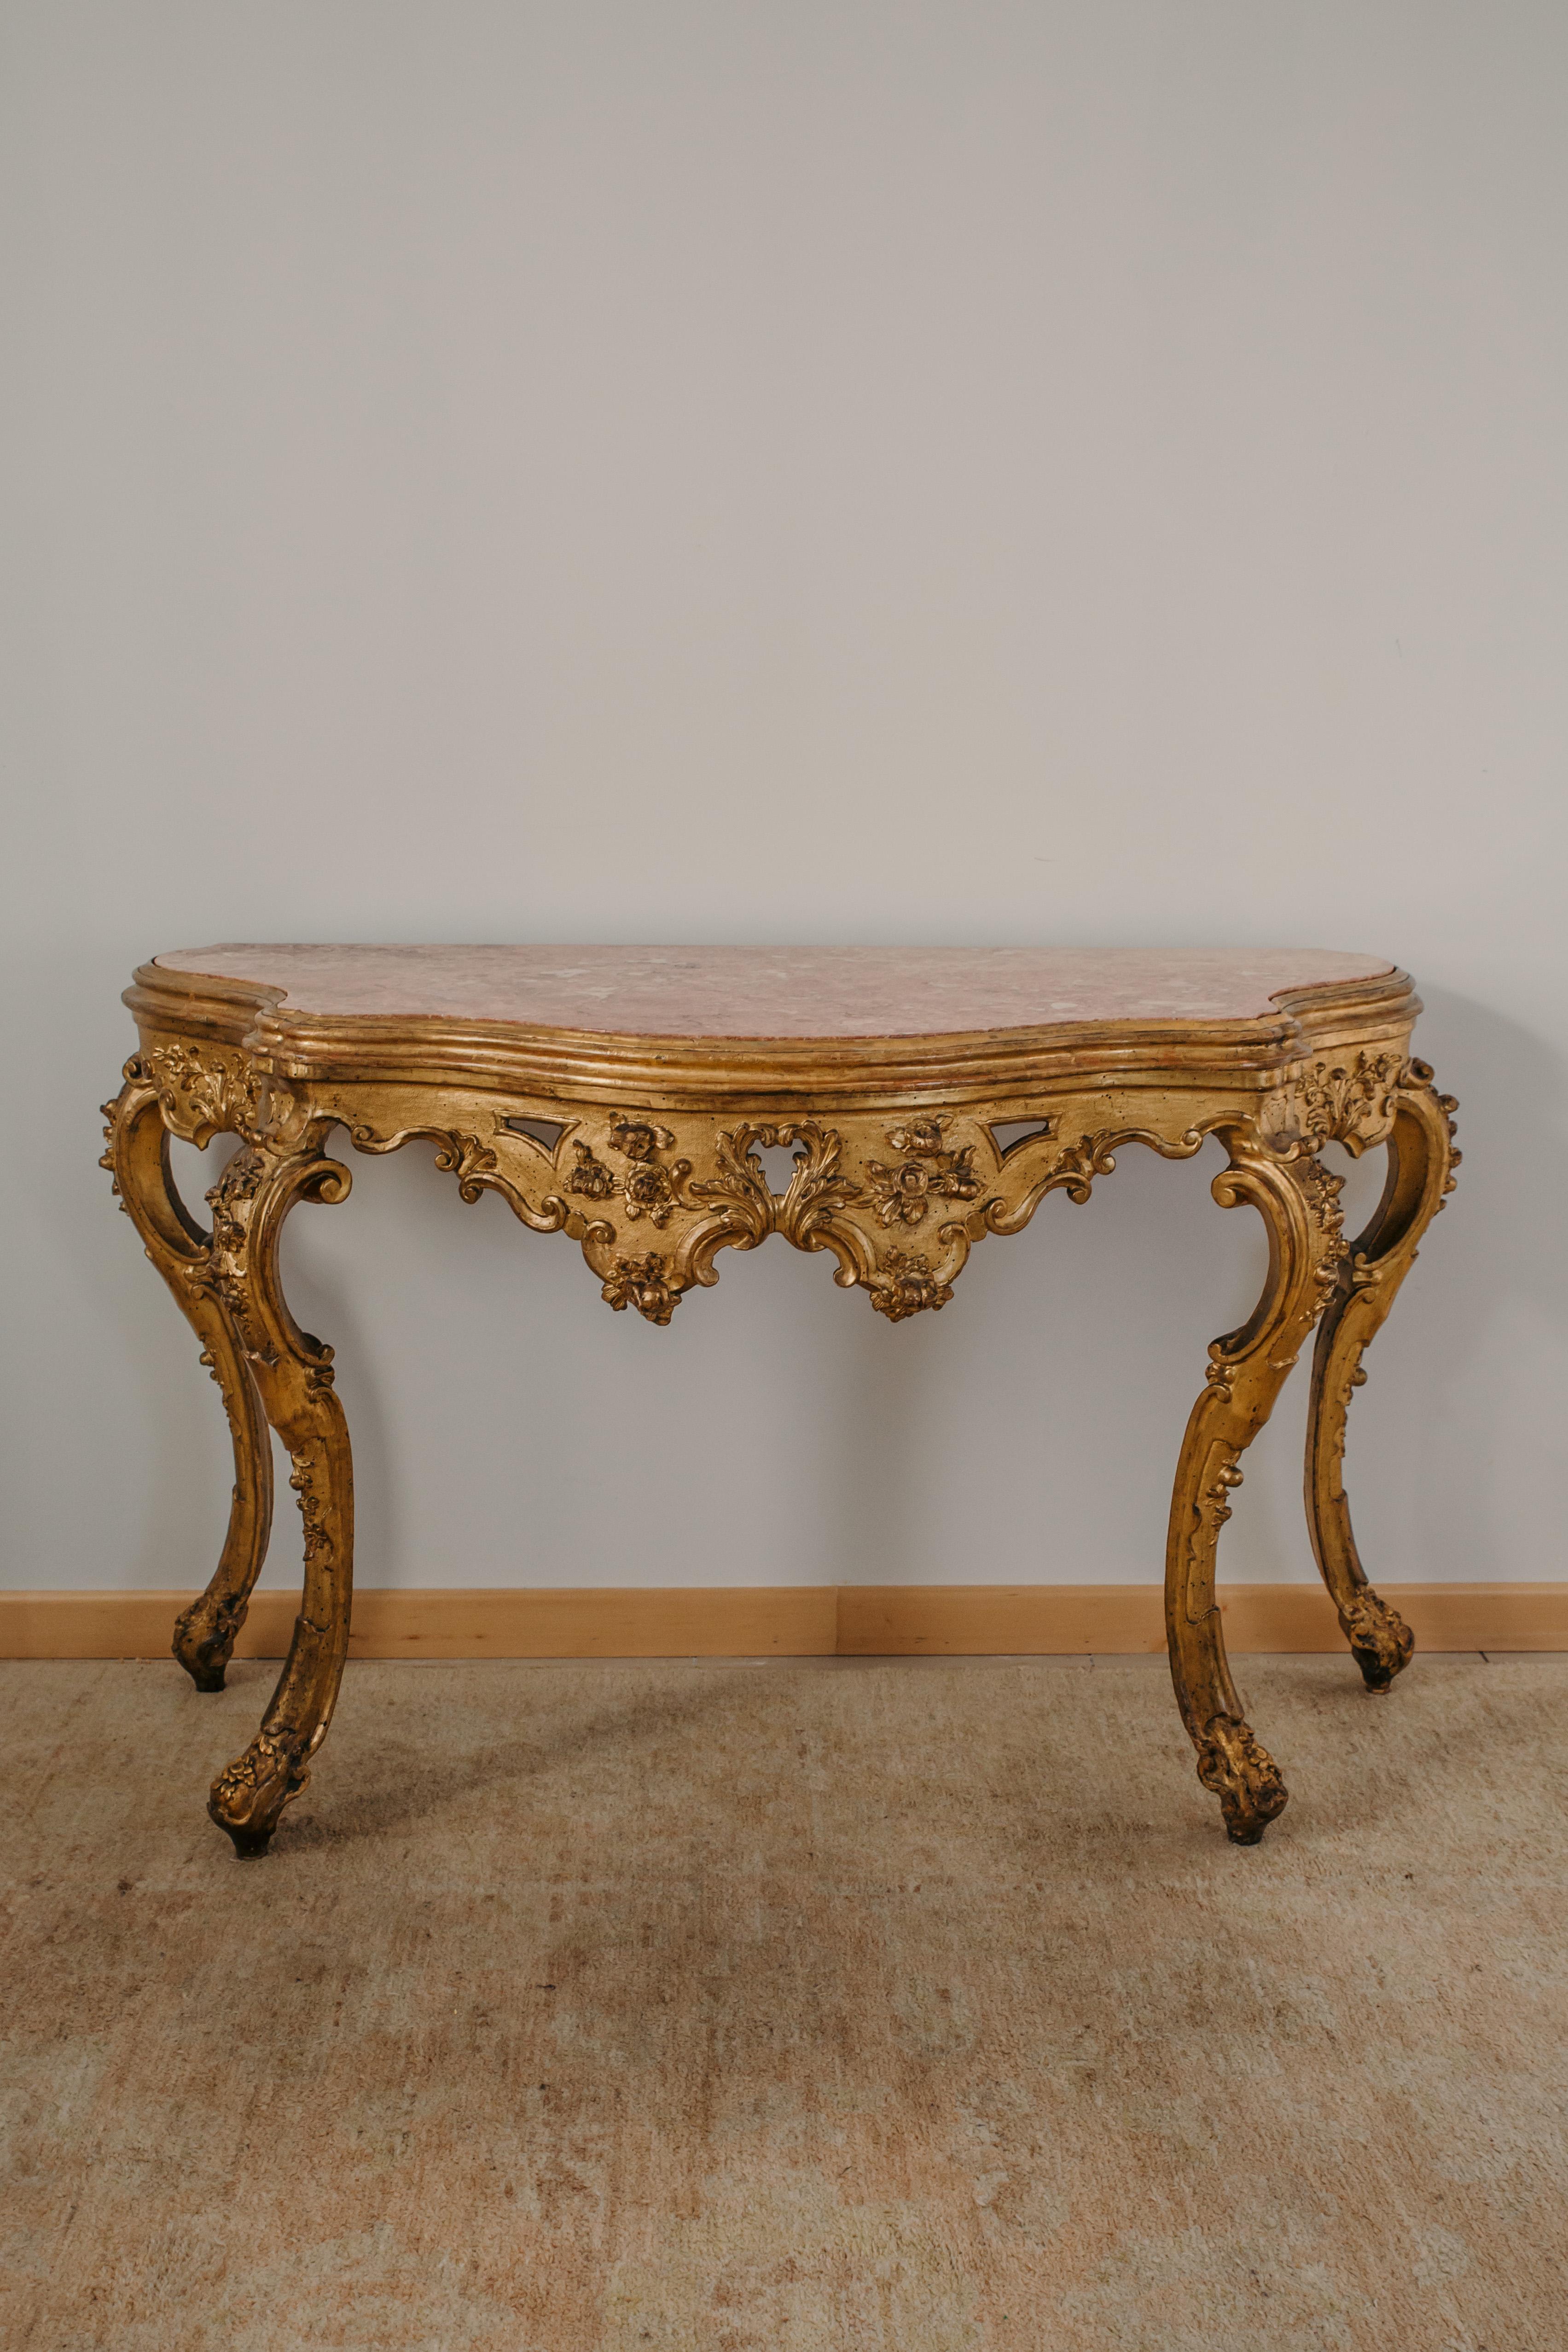 This console was made in the XVIII century in Venice, Italy, from carved and gilded wood. The recessed top is in pink marble. The console has a Louis XV style line, with a strongly shaped top, a band and curved legs. On the front and sides the band